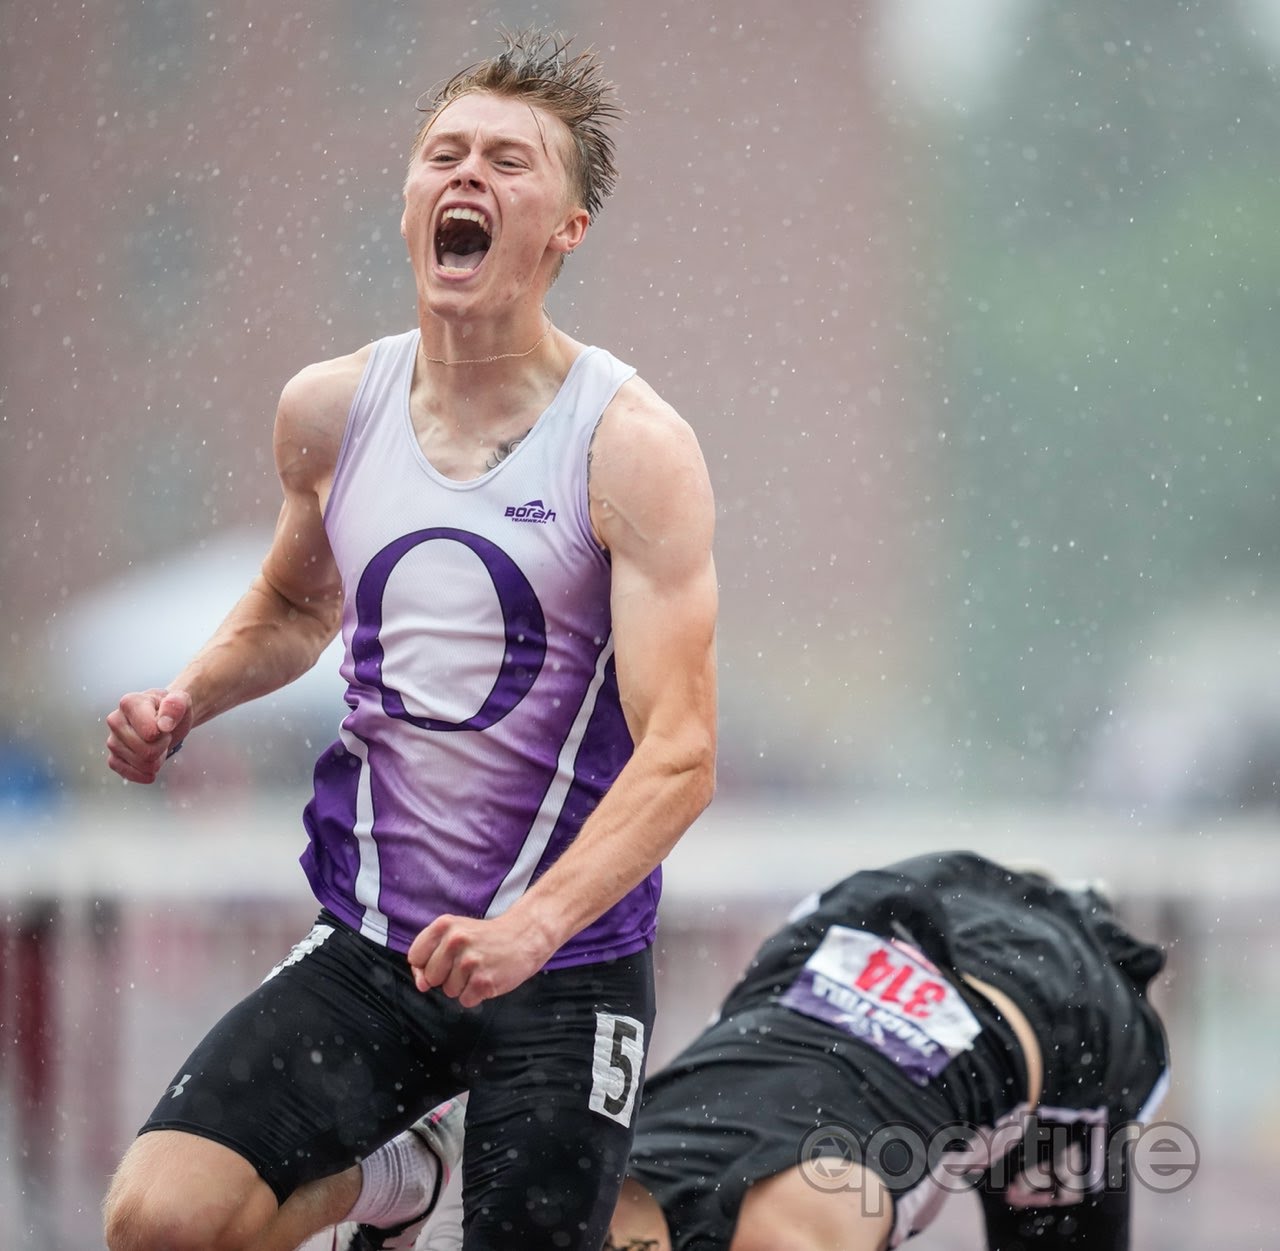 Malecek, Peterson win state titles for Onalaska, which placed 4th overall